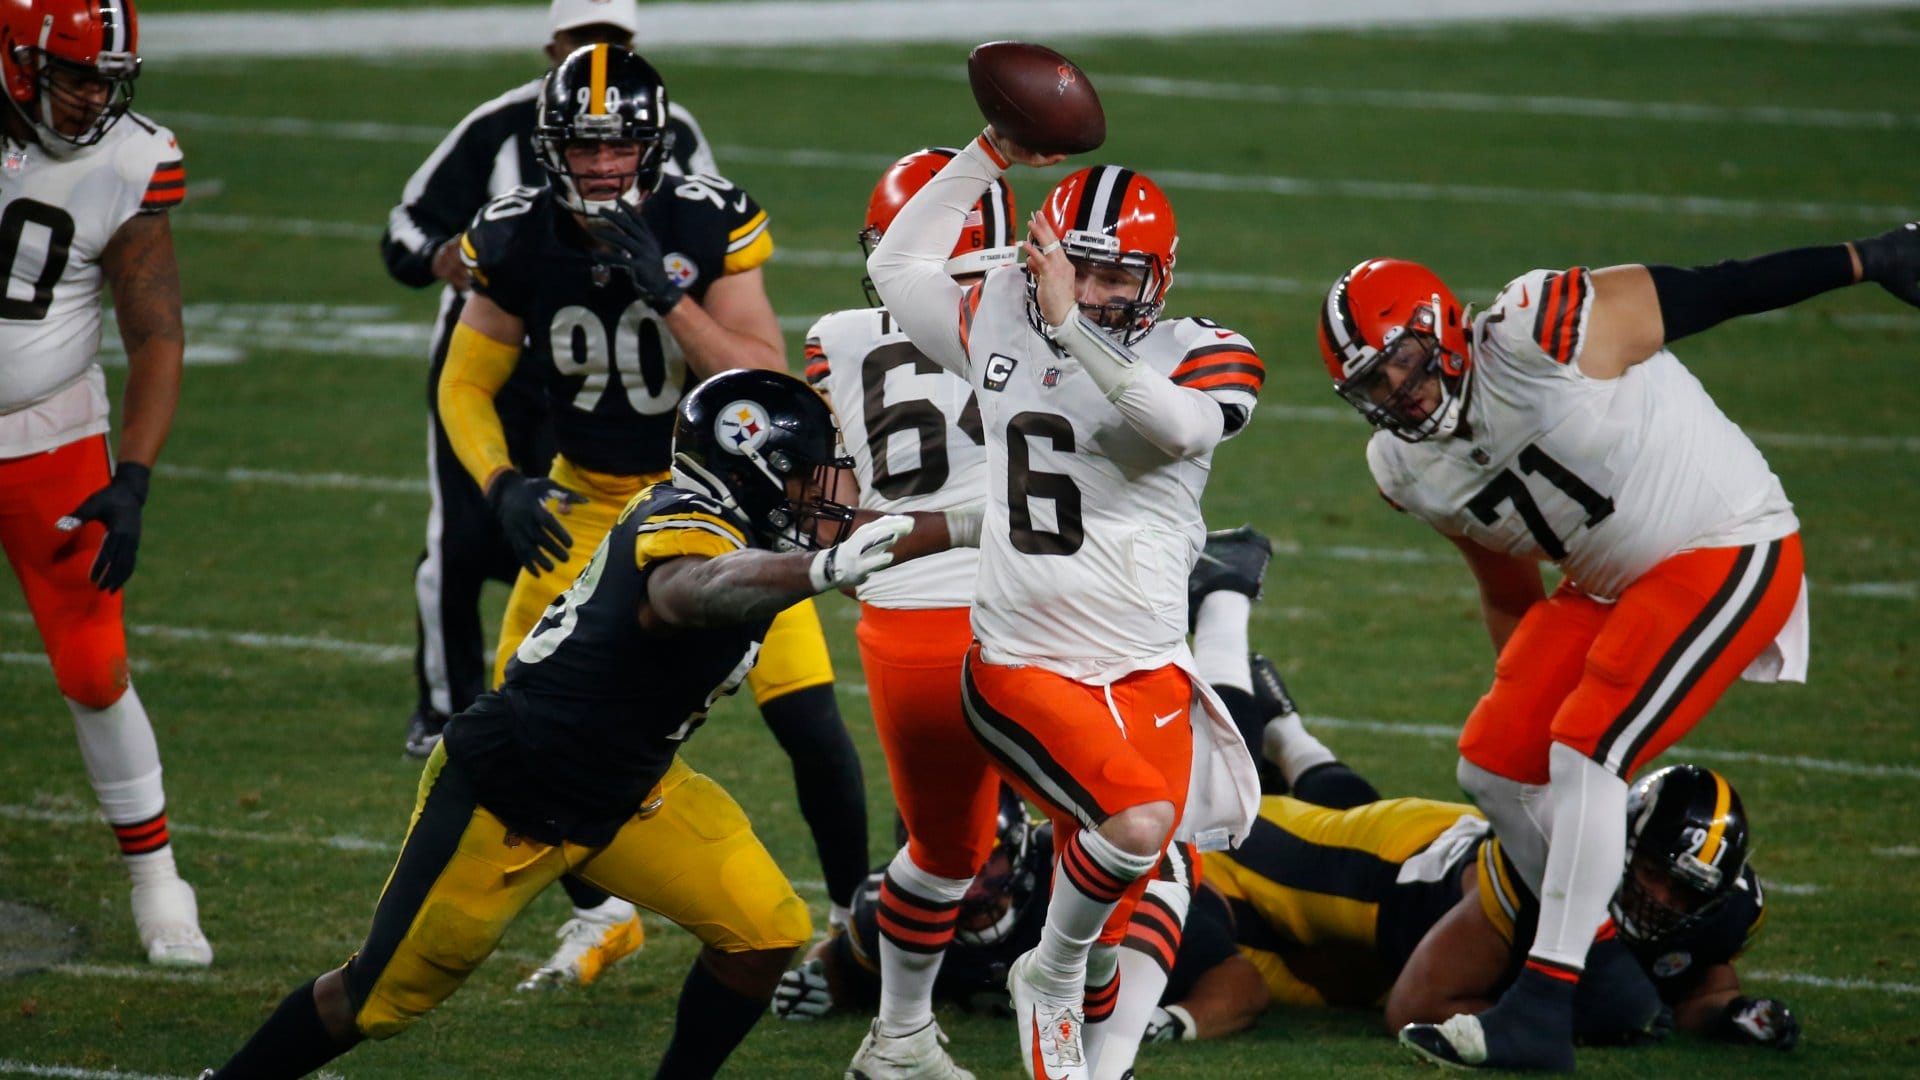 PITTSBURGH, PA - JANUARY 11: Baker Mayfield #6 of the Cleveland Browns in action against Vince Williams #98 of the Pittsburgh Steelers on January 11, 2021 at Heinz Field in Pittsburgh, Pennsylvania. (Photo by Justin K. Aller/Getty Images)